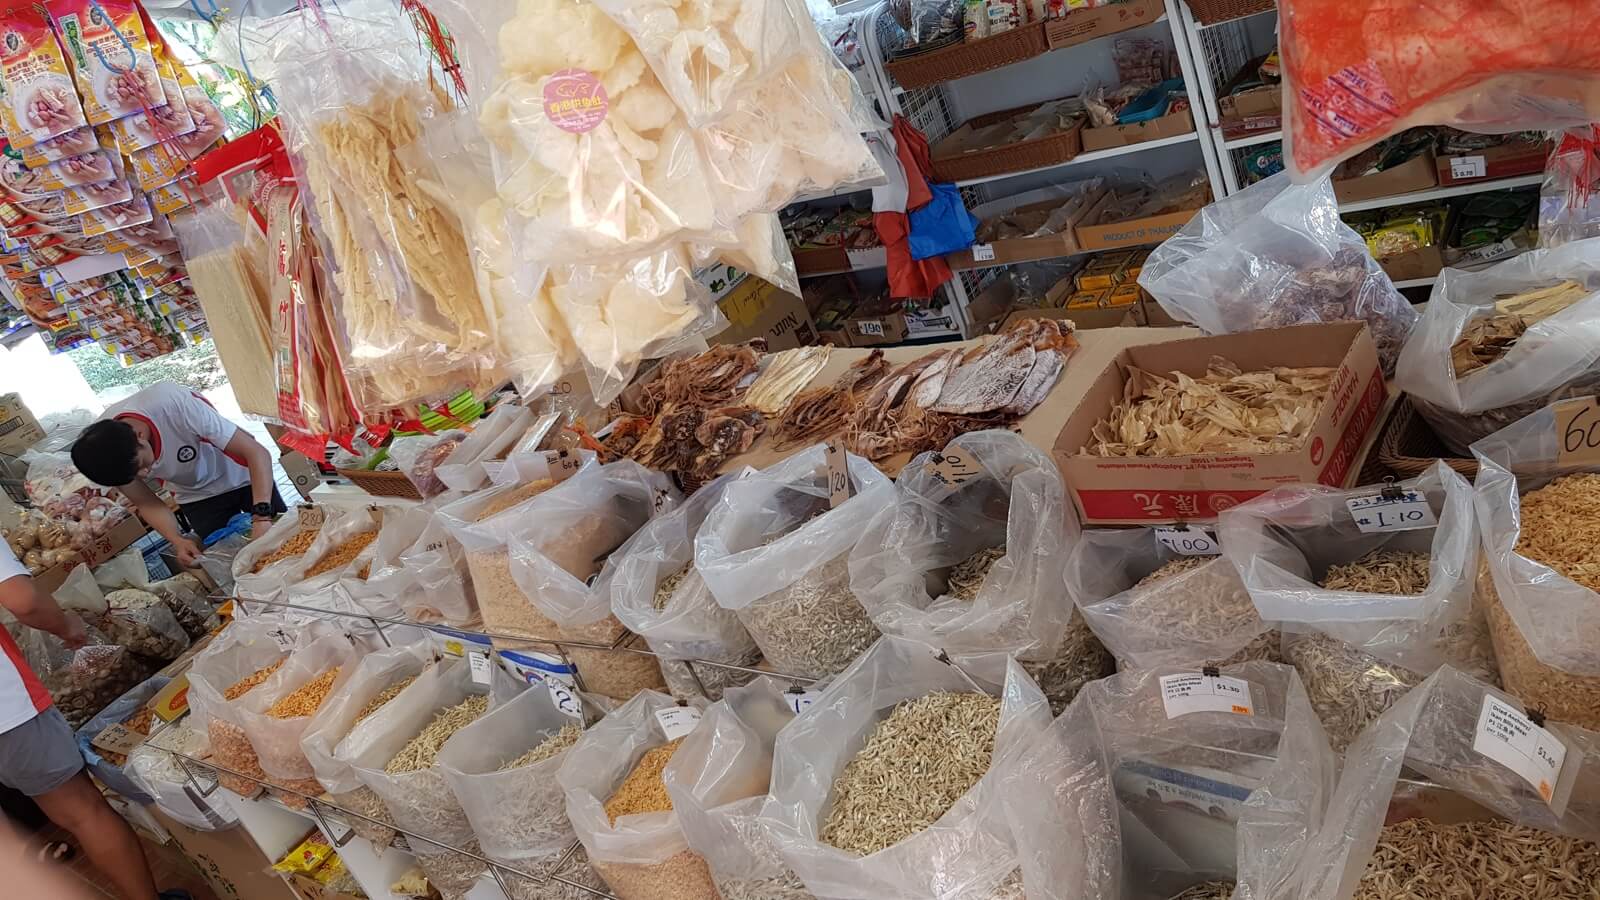 (Sold) Profitable Dried Goods Provision Shop For Sale In Good Location With High Human Traffic